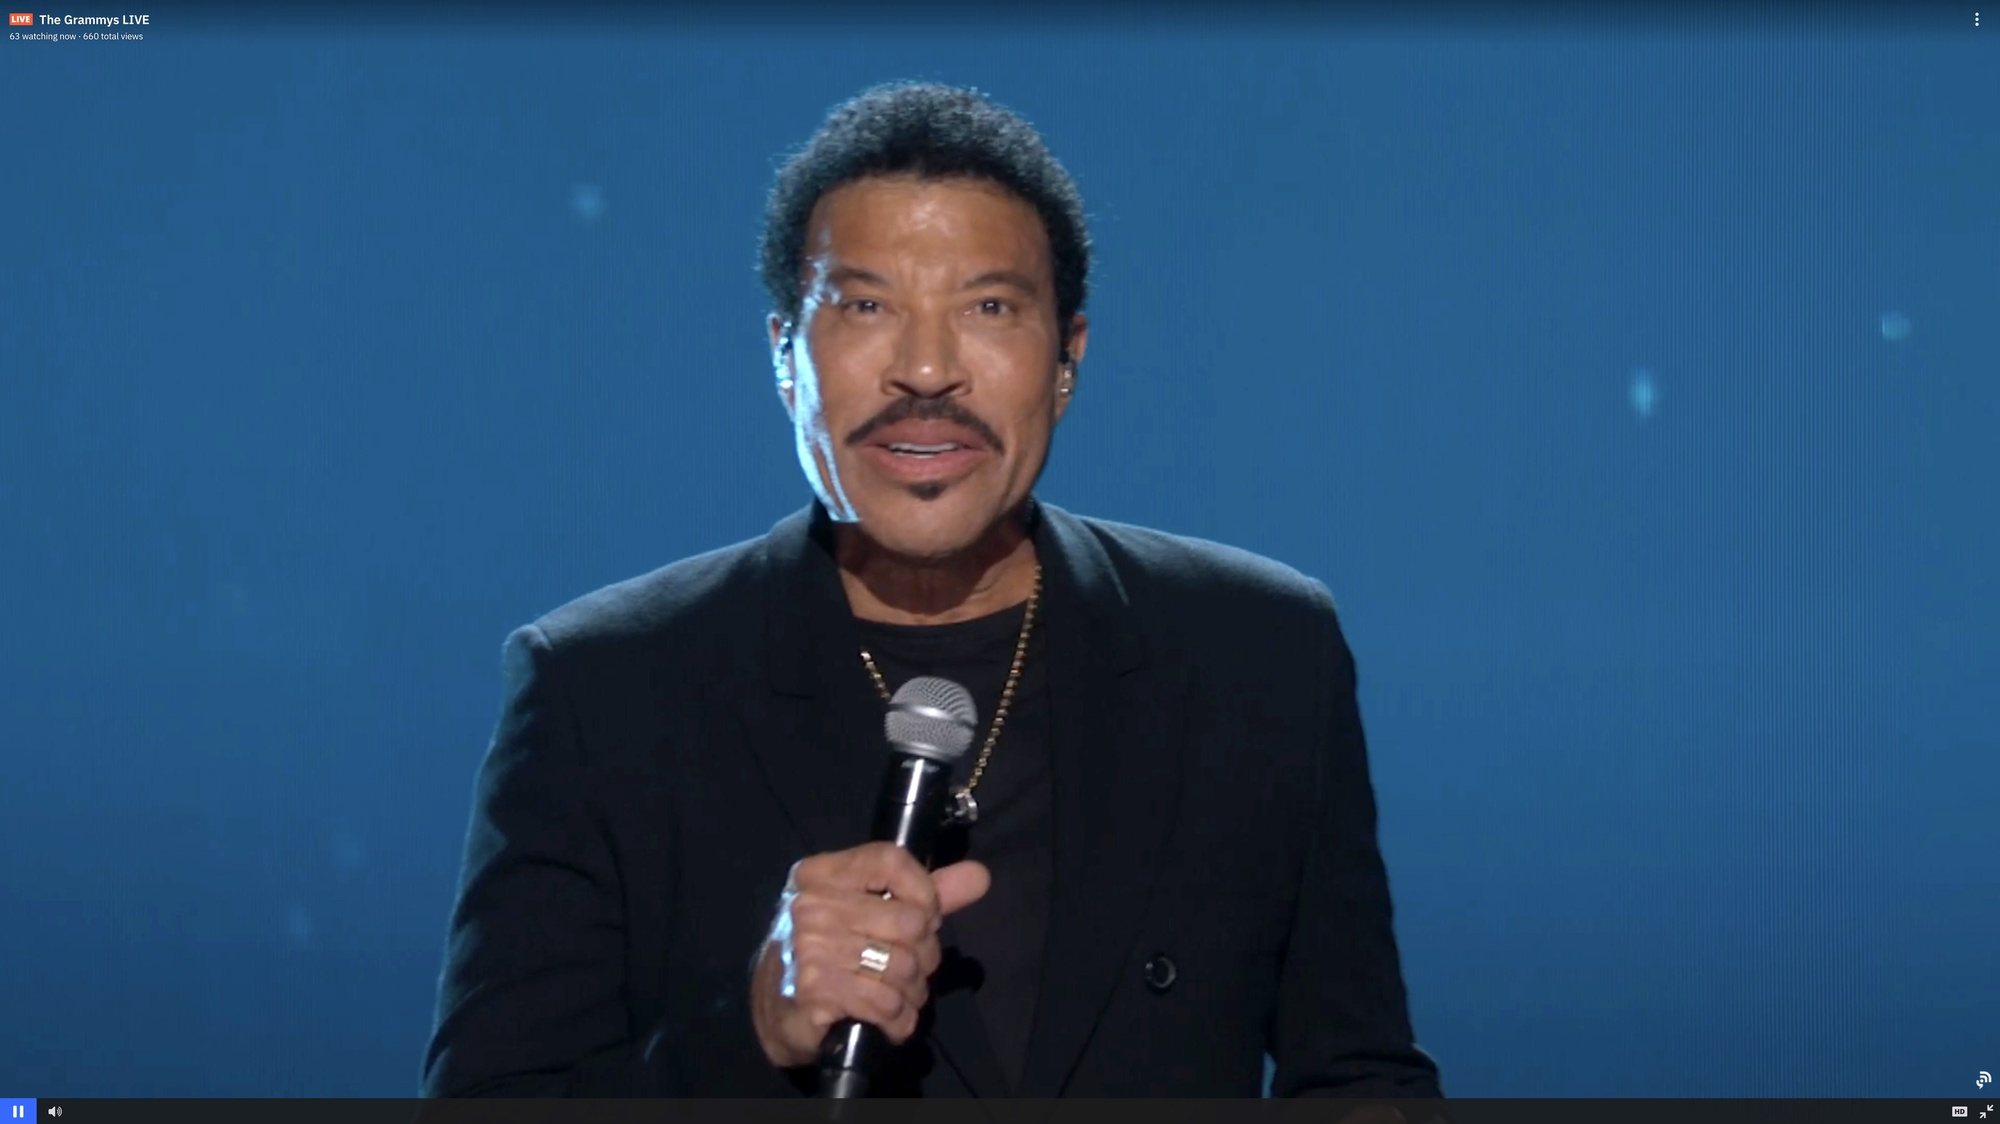 epa09075165 A handout screengrab made available by The Recording Academy shows Lionel Richie performing onstage during the 63rd Annual Grammy Awards ceremony at the Los Angeles Convention Center, in Los Angeles, California, USA, 14 March 2021.  EPA/Theo Wargo / HANDOUT ATTENTION EDITORS: IMAGE TO BE USED ONLY IN RELATION TO THE STATED EVENT / HANDOUT EDITORIAL USE ONLY/NO SALES/NO ARCHIVES